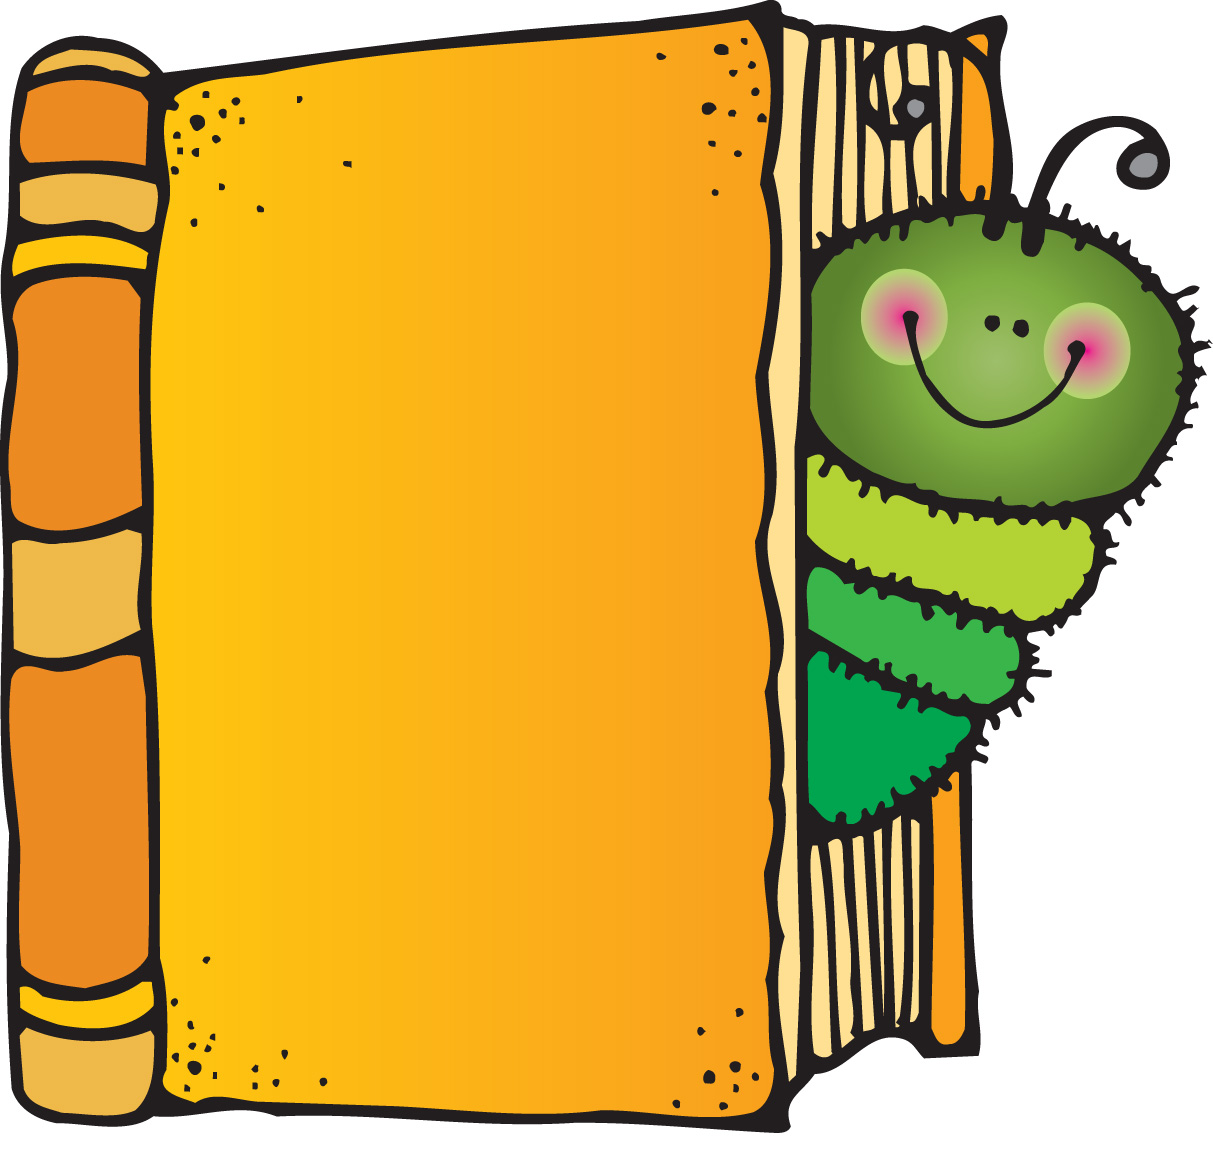 clipart images of books - photo #40